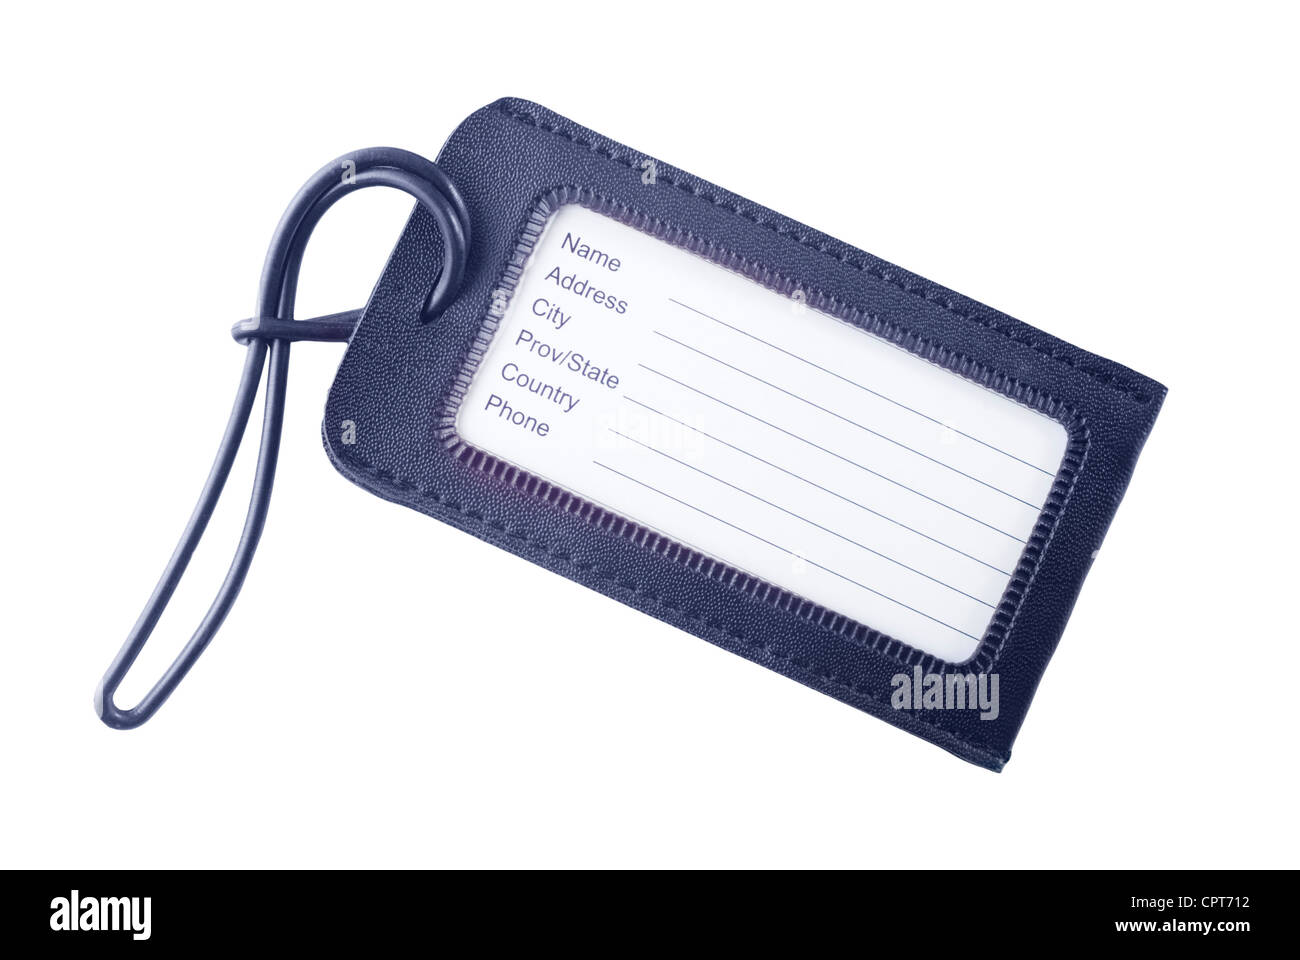 Leather luggage tag isolated on white with space for name, address, etc  Stock Photo - Alamy